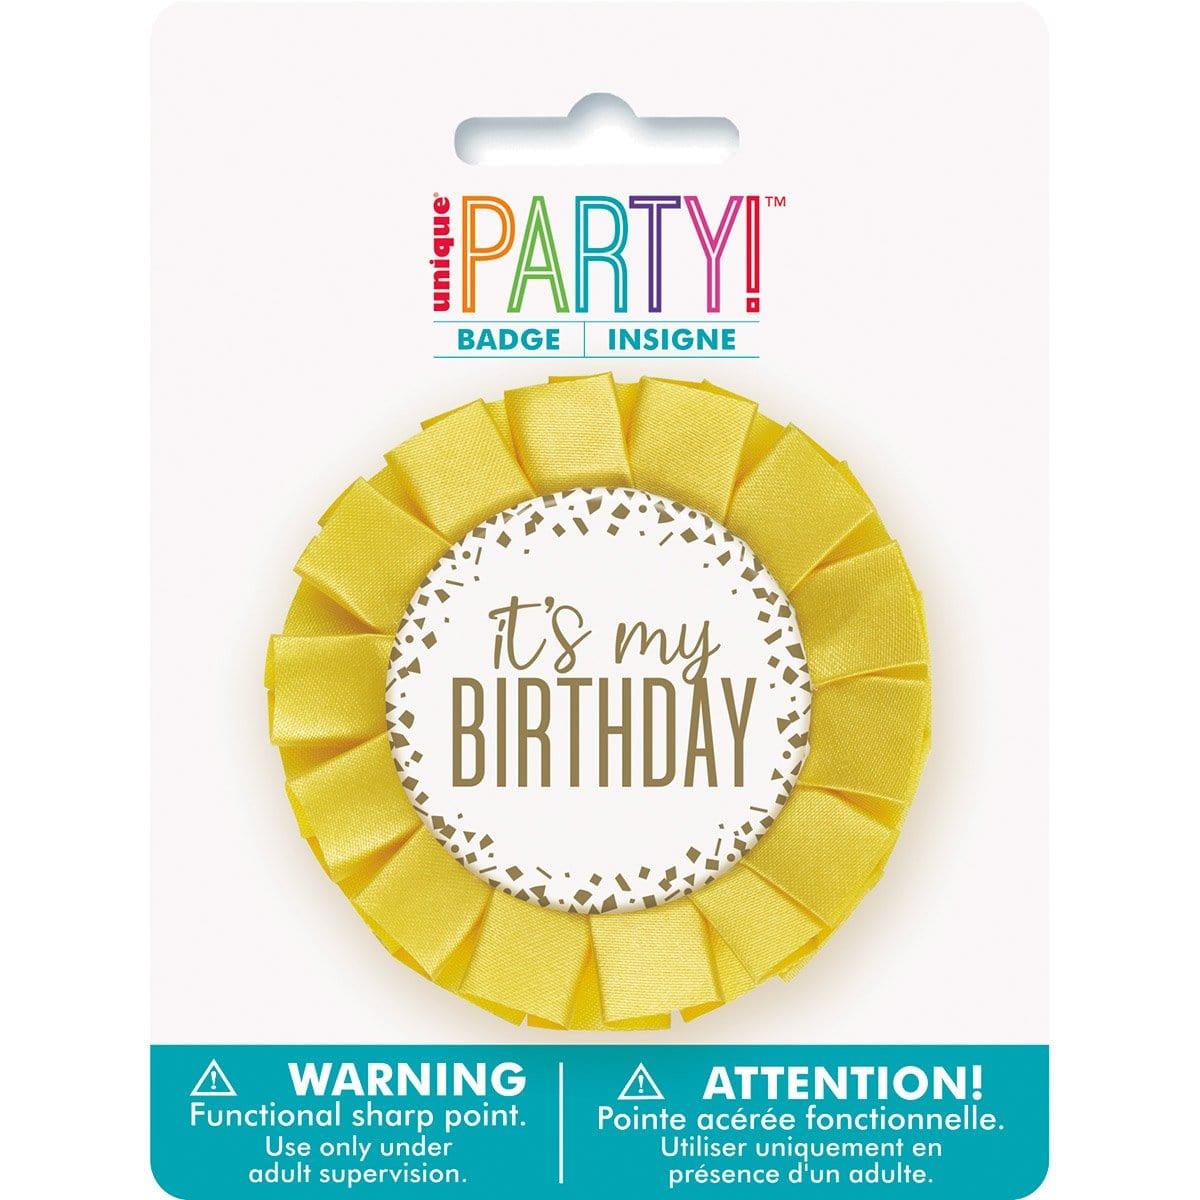 Buy General Birthday Gold Confetti Birthday Badge sold at Party Expert